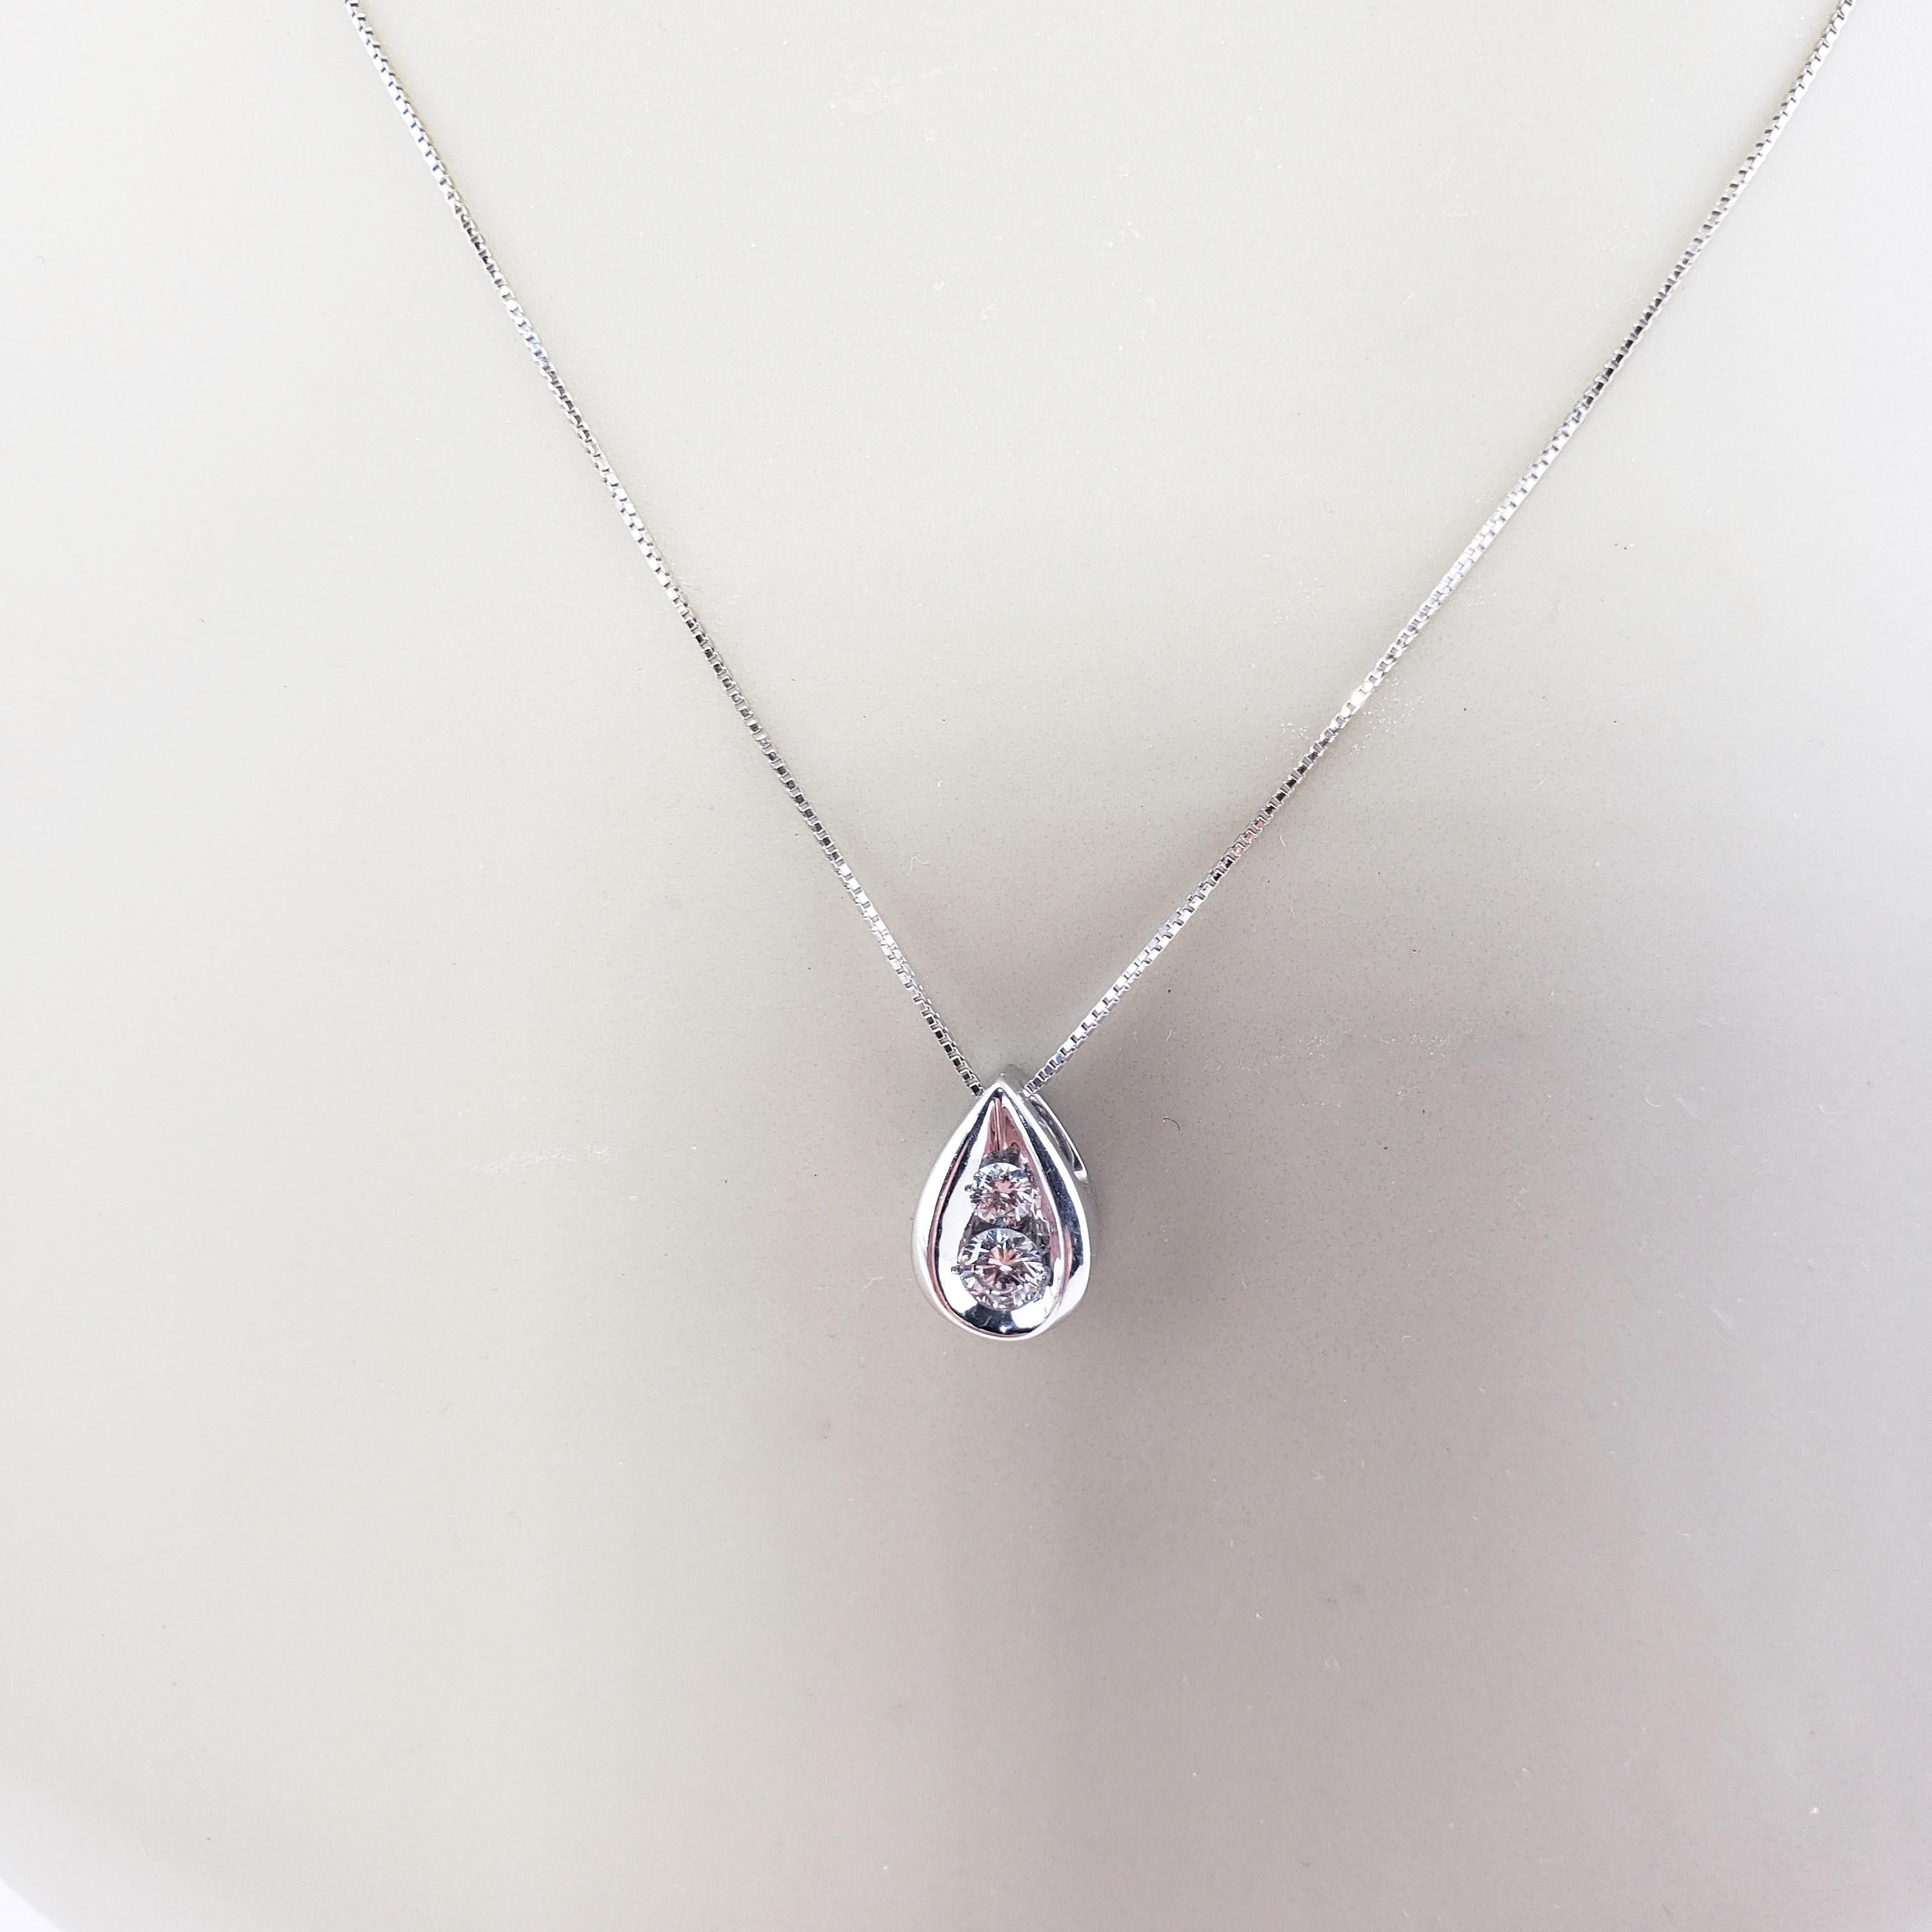 Vintage 14 Karat White Gold Diamond Pendant Necklace-

This sparkling tear drop pendant features two round brilliant cut diamonds set in elegant 14K white gold. Suspends from a classic box chain necklace.

Approximate total diamond weight: .22